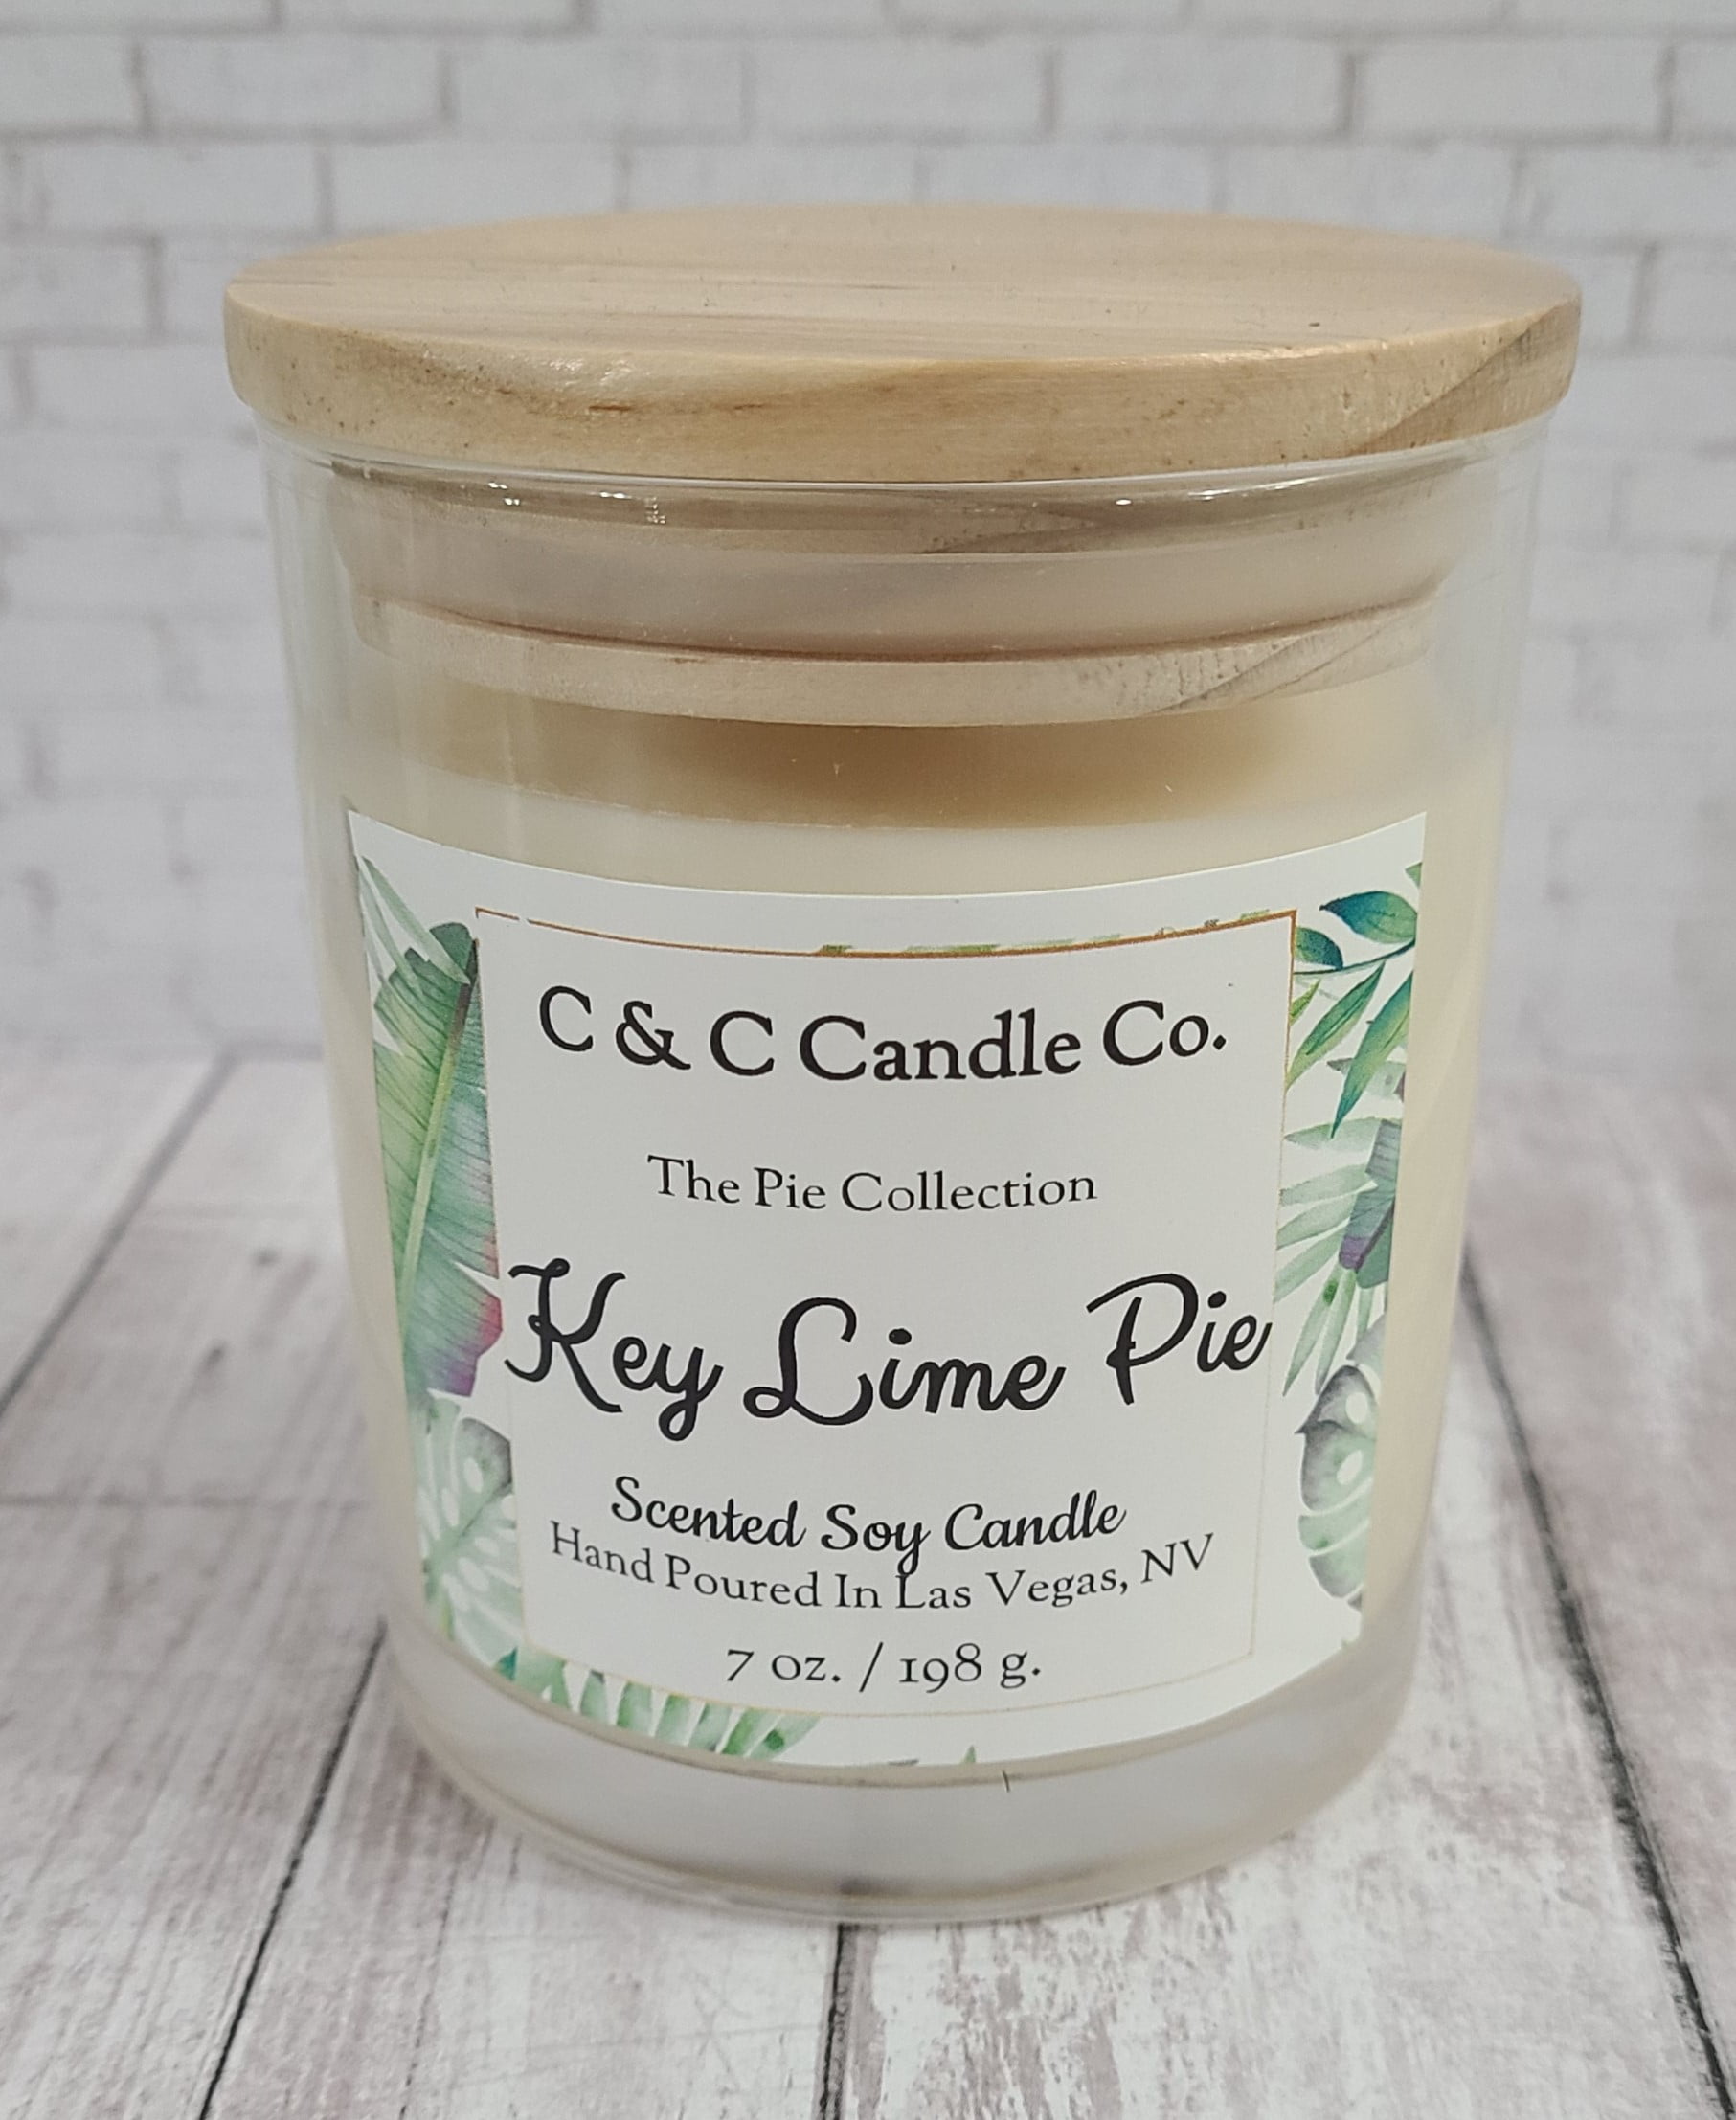 Key Lime Pie 100% Soy Wax Candle